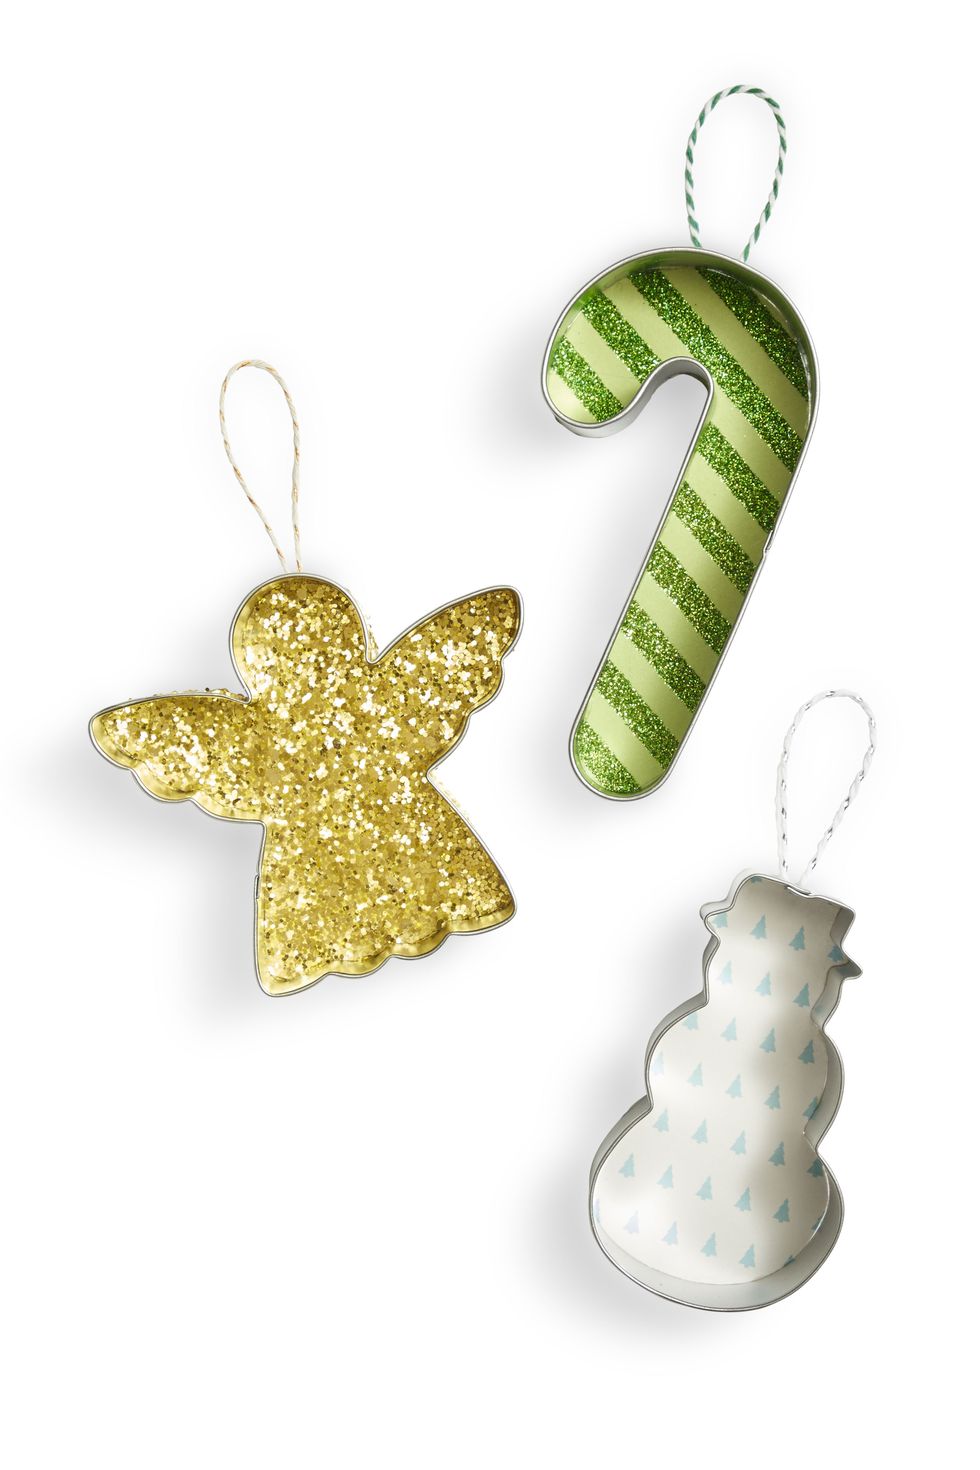 christmas-crafts-cookie-cutter-ornaments-1574709880.jpg?crop=0.8722117990410674xw:1xh;center,top&resize=980:*